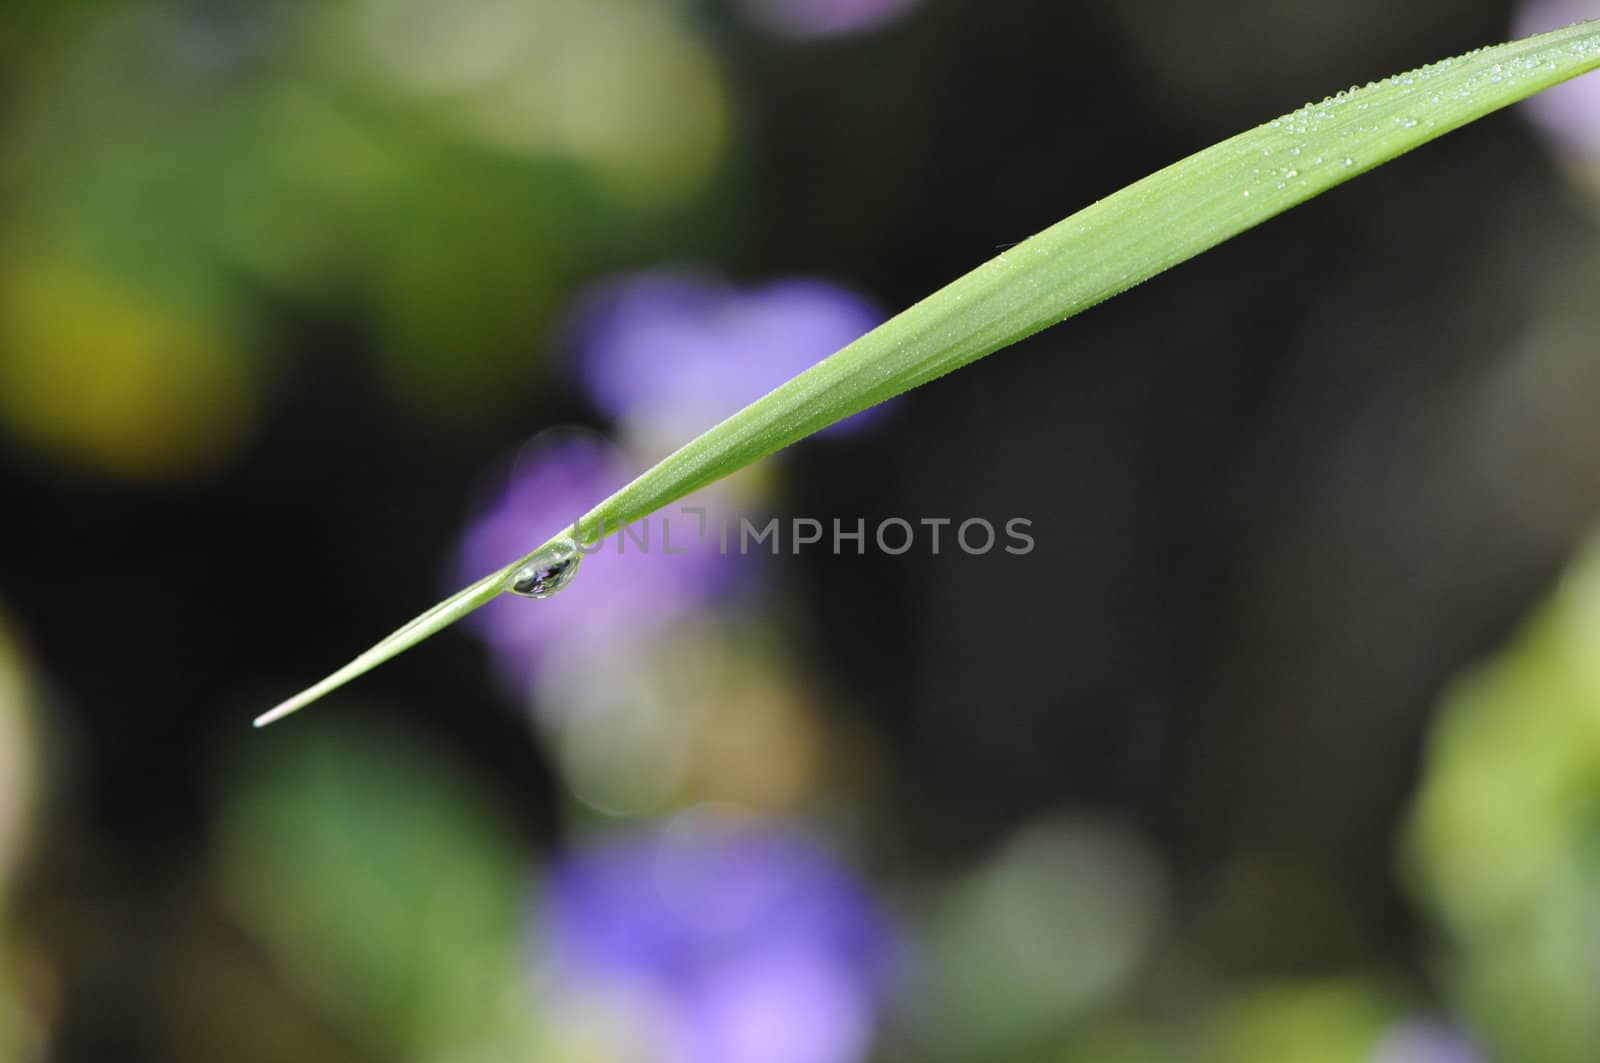 Water Drop on a Grass Stem with a Blurred Background